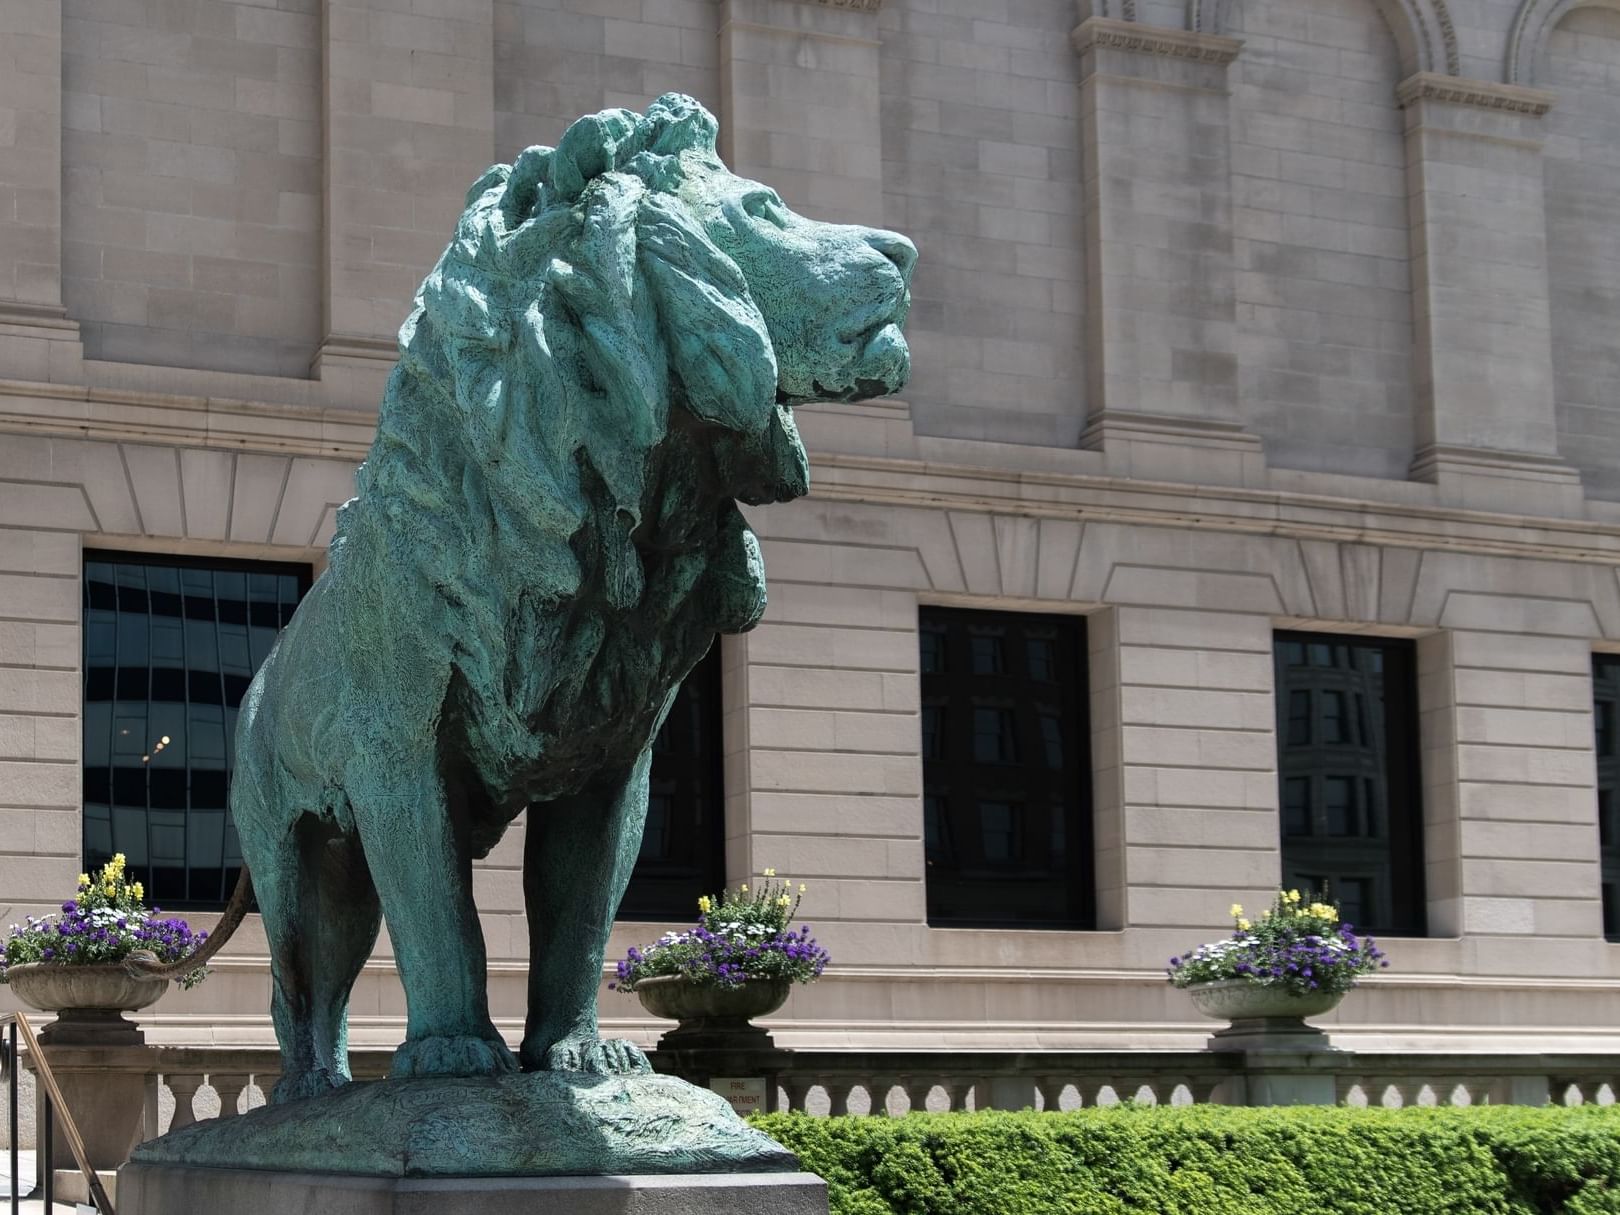 A lion statue of The Art Institute of Chicago near Saint Clair